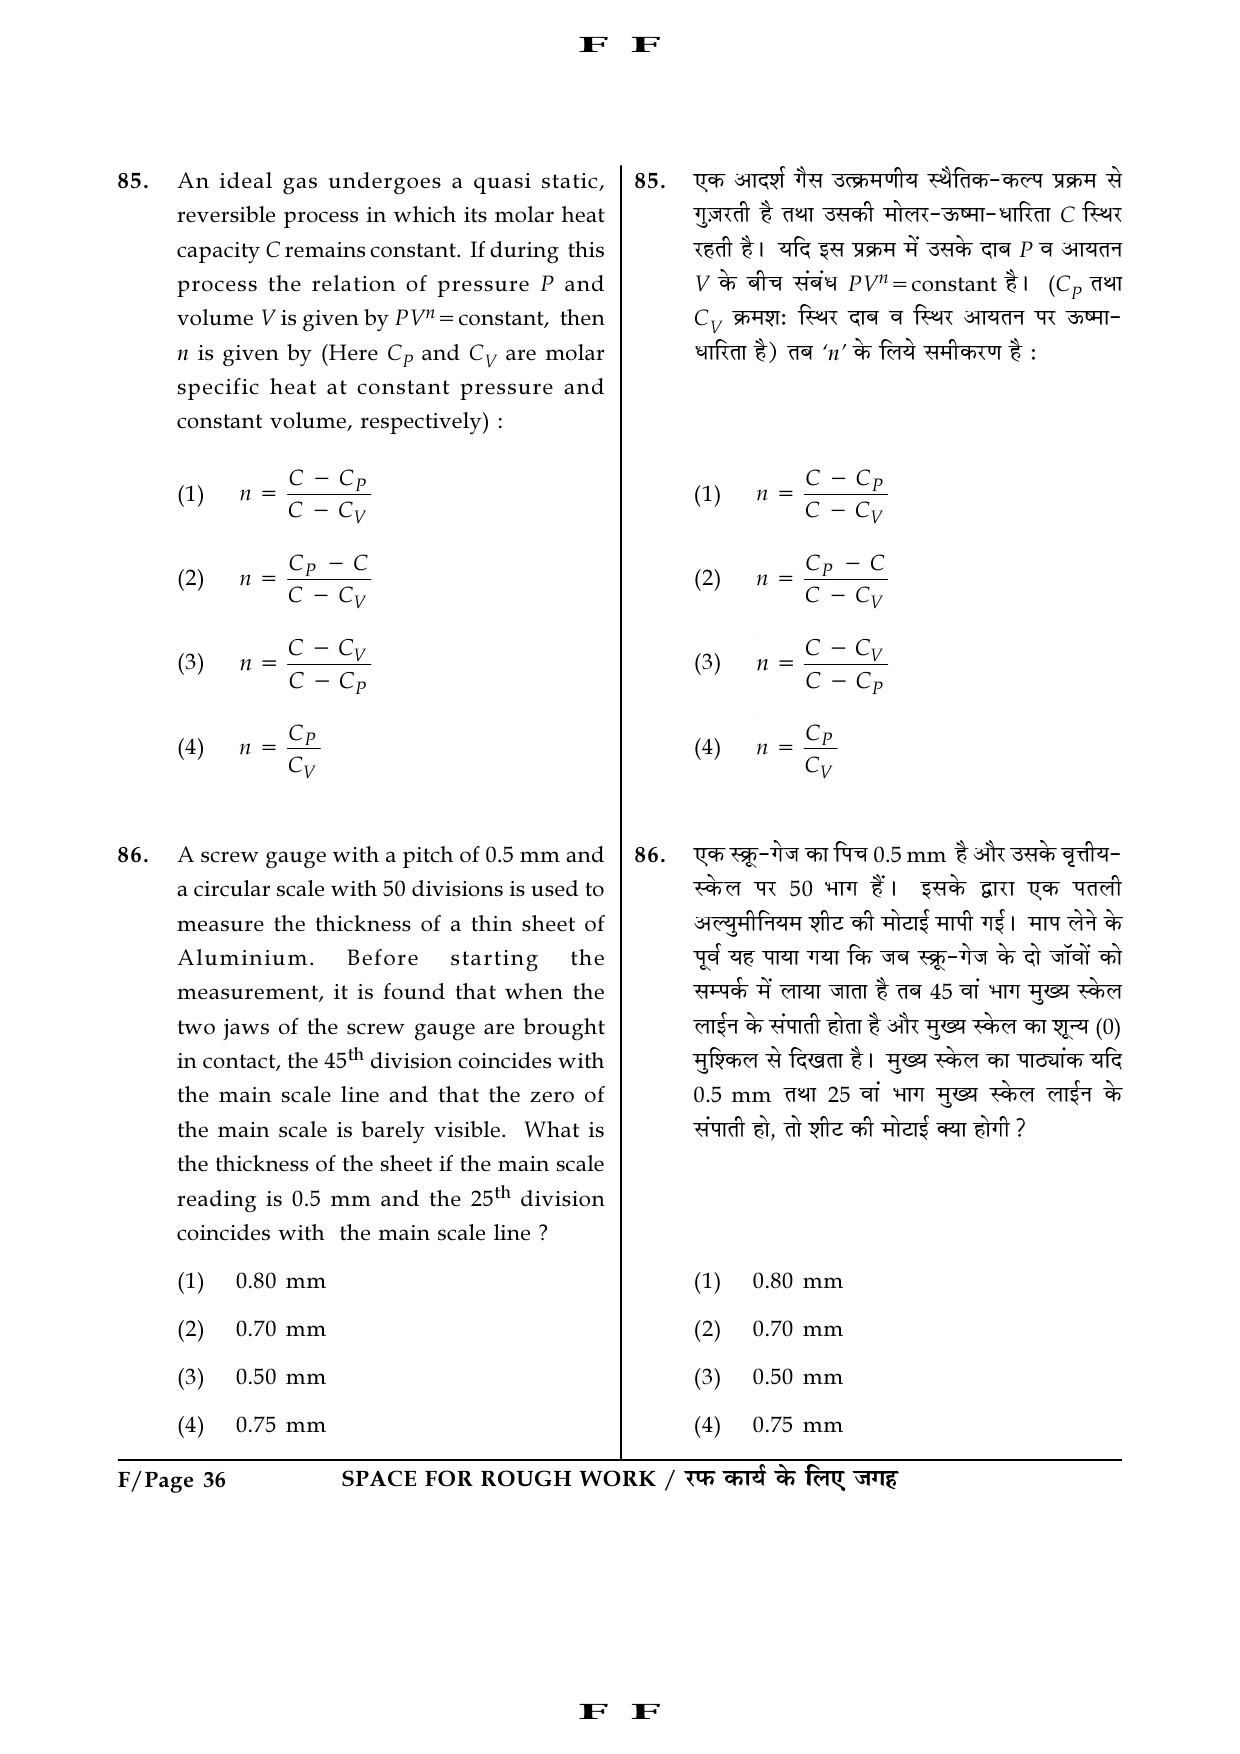 JEE Main Exam Question Paper 2016 Booklet F 36